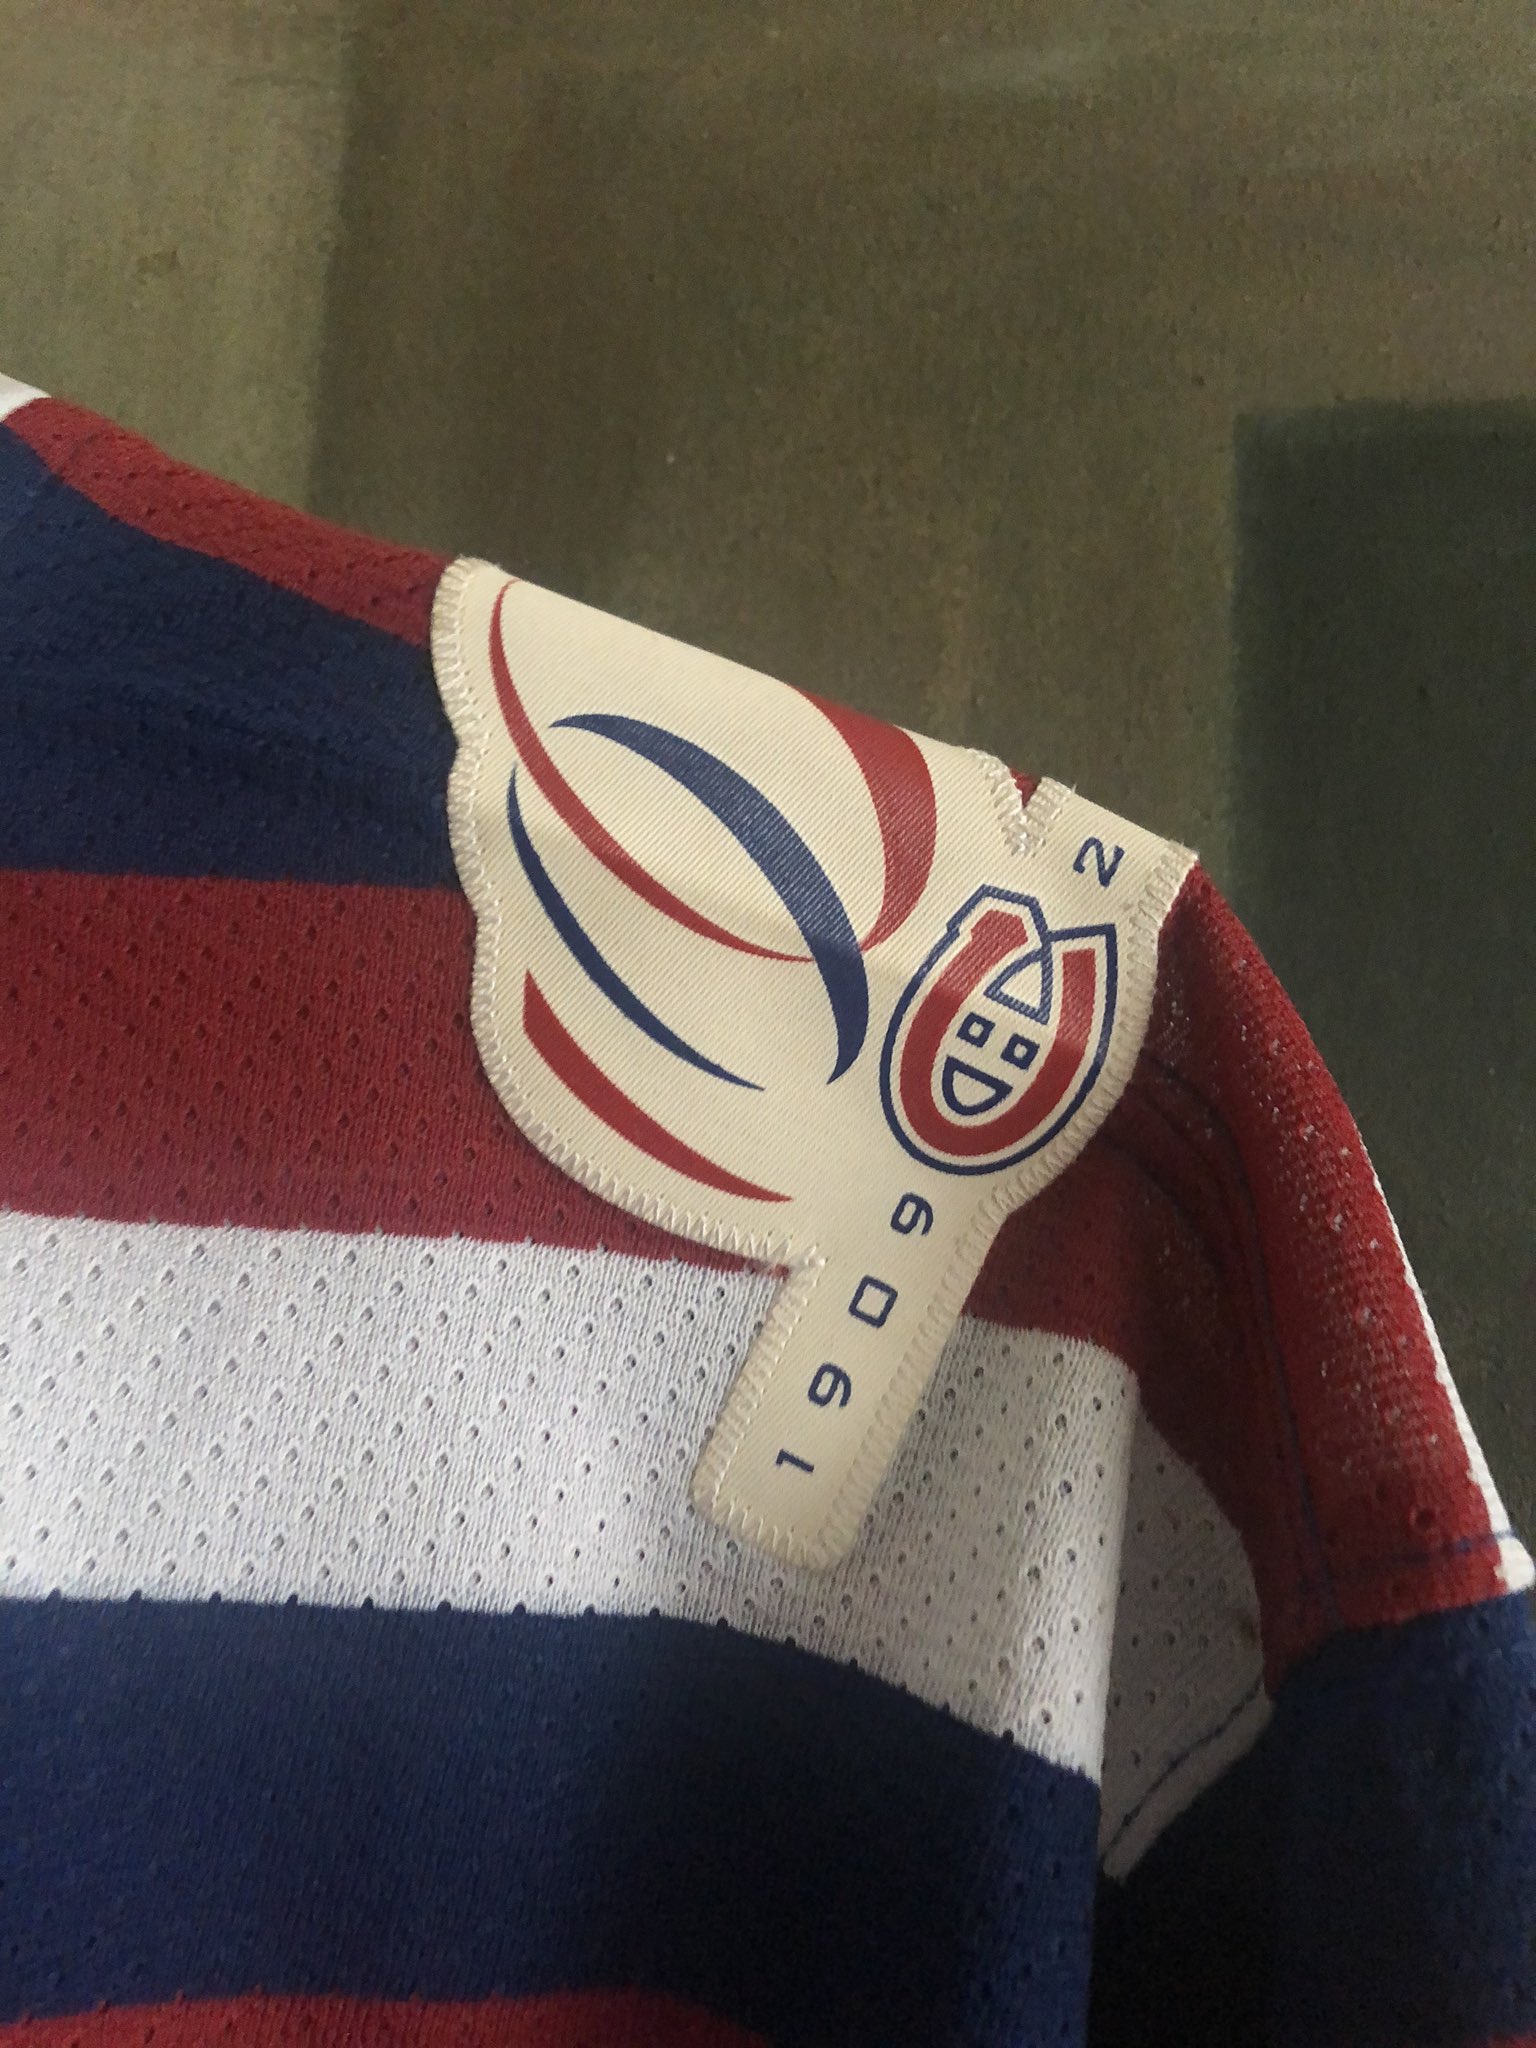 For Sale: Montreal Canadiens centennial barber pole jersey sz L